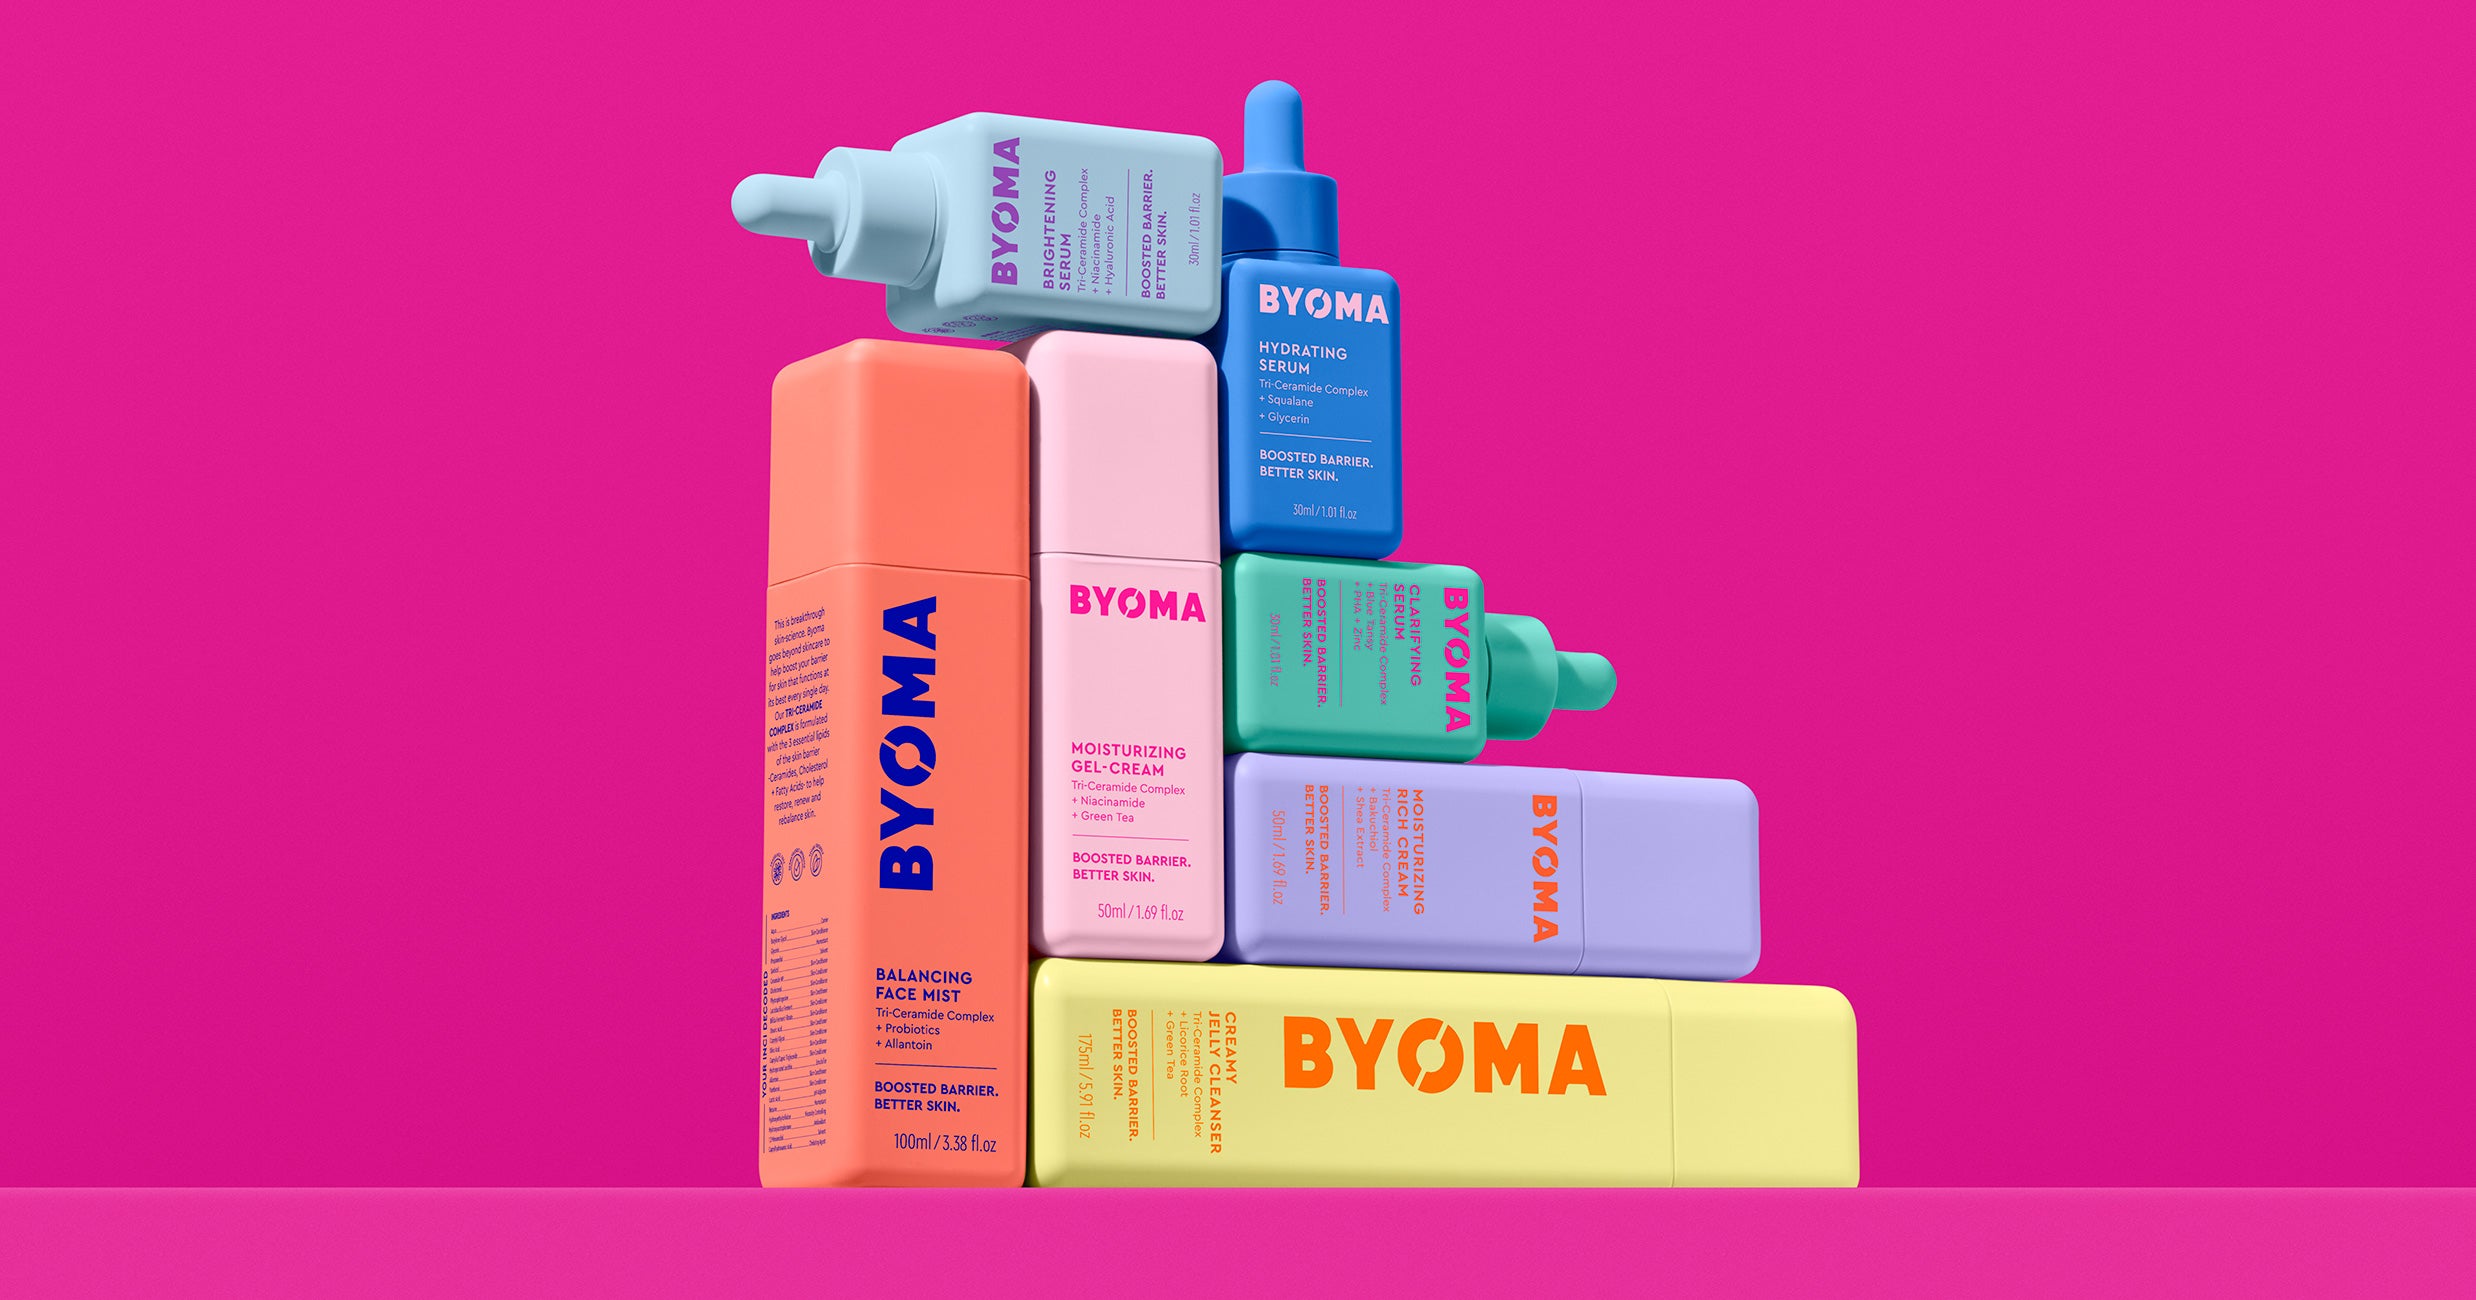 Byoma Skincare (20 products) compare prices today »